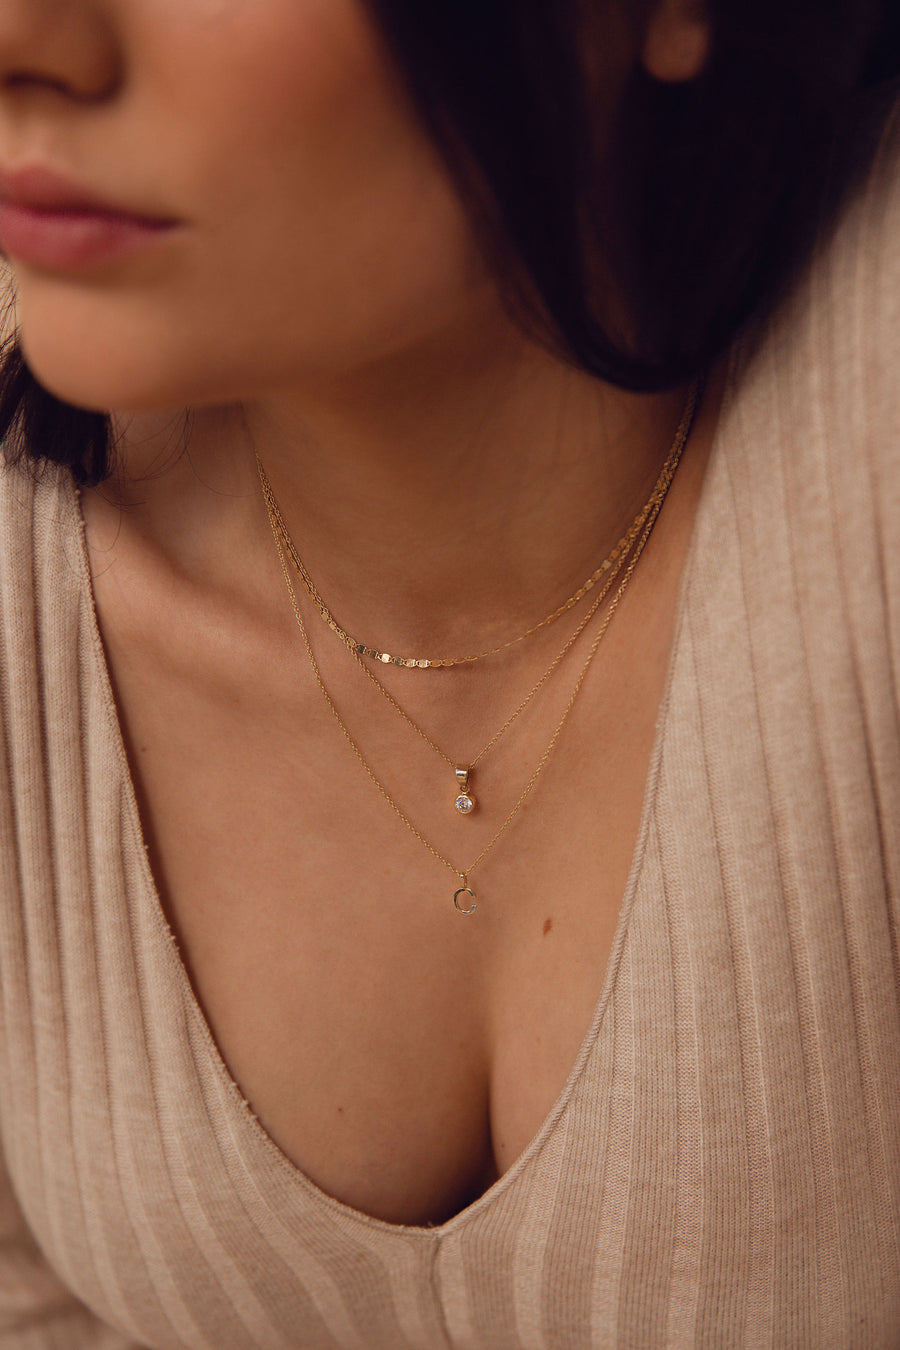 Block Initial Necklace | 10k Gold